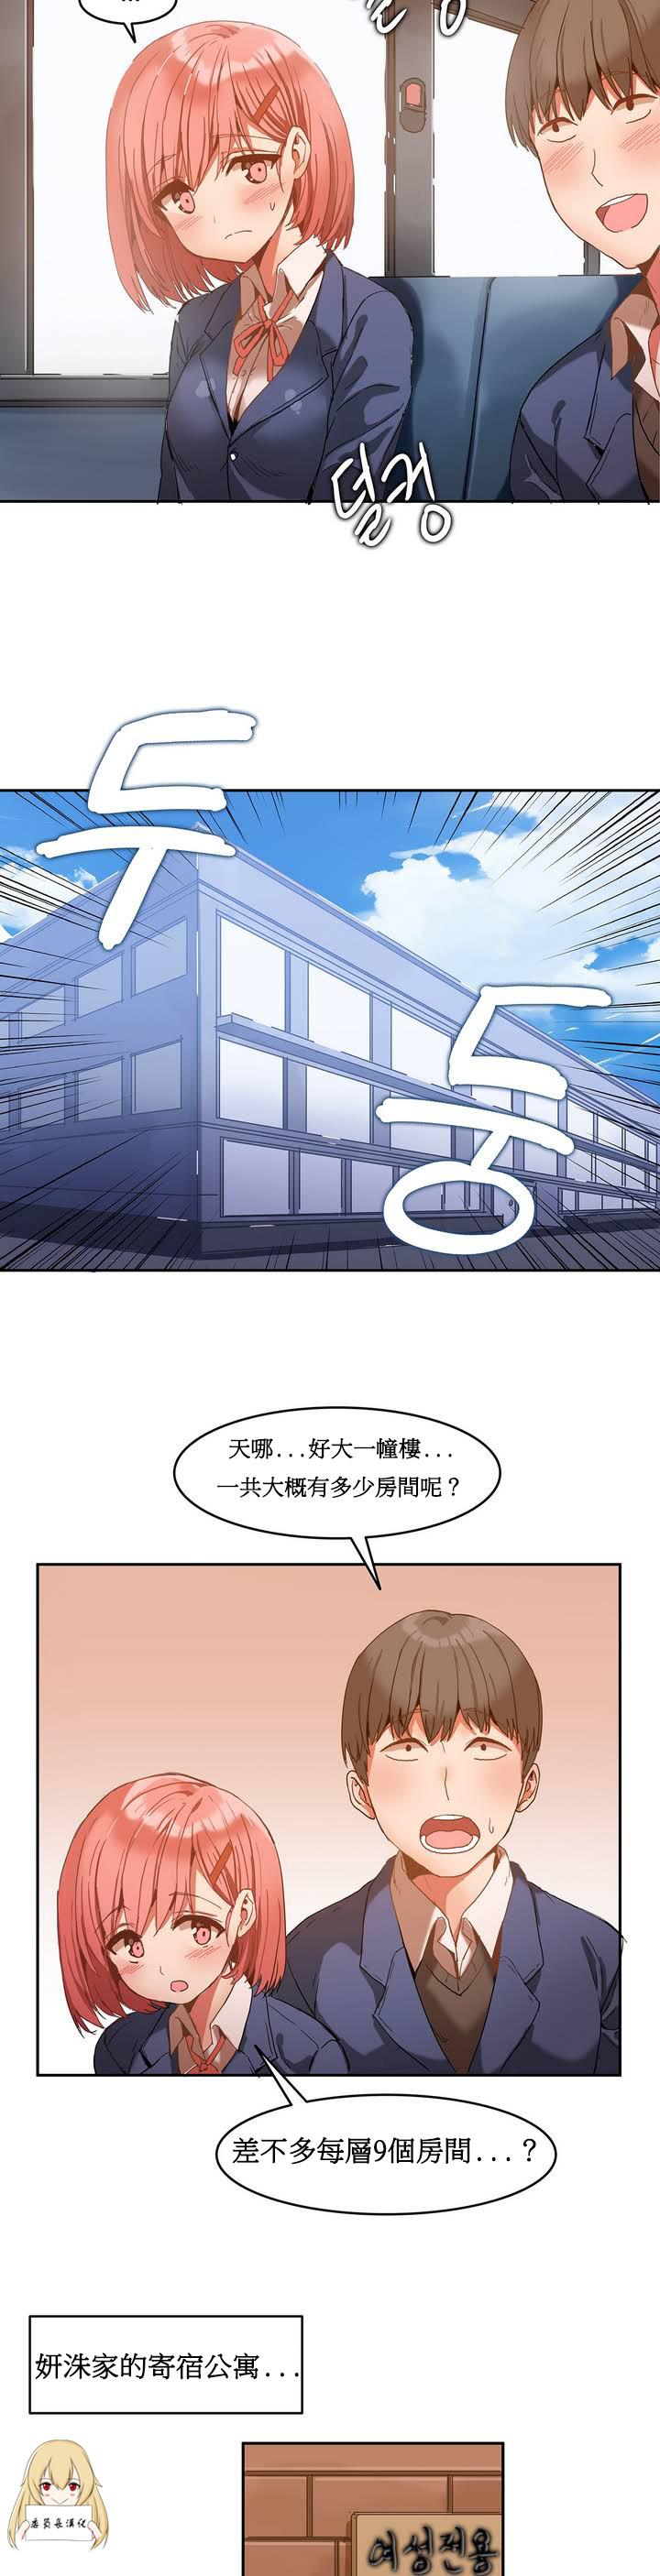 Asian Hahri's Lumpy Boardhouse Ch. 0~24【委員長個人漢化】（持續更新） Maledom - Page 11